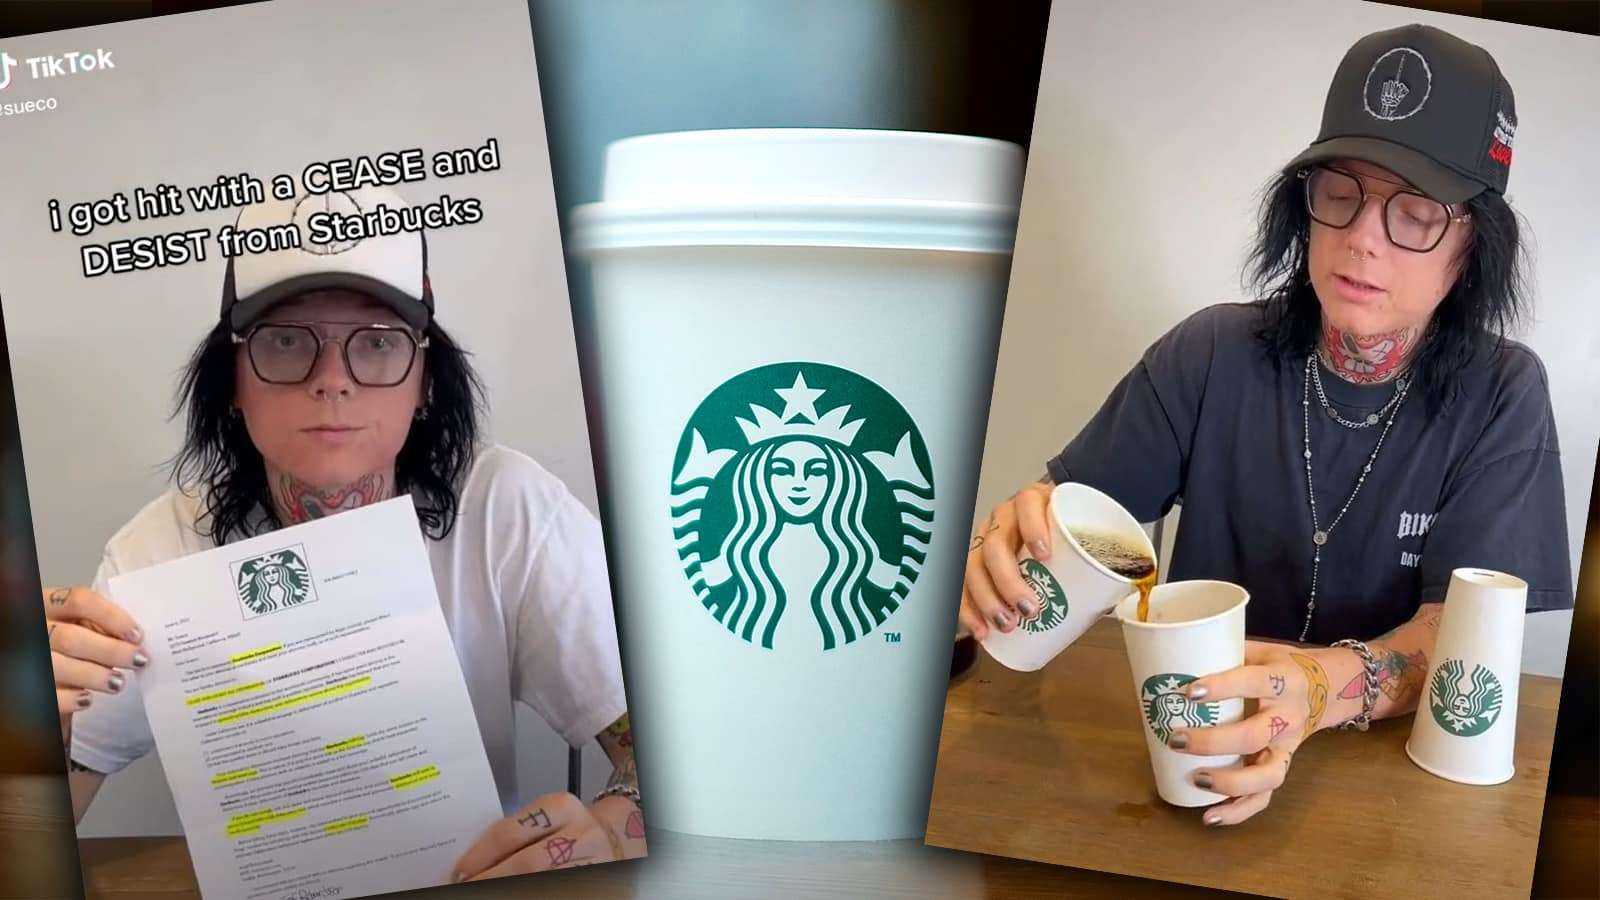 Sueco says Starbucks cease and desist over cup claims